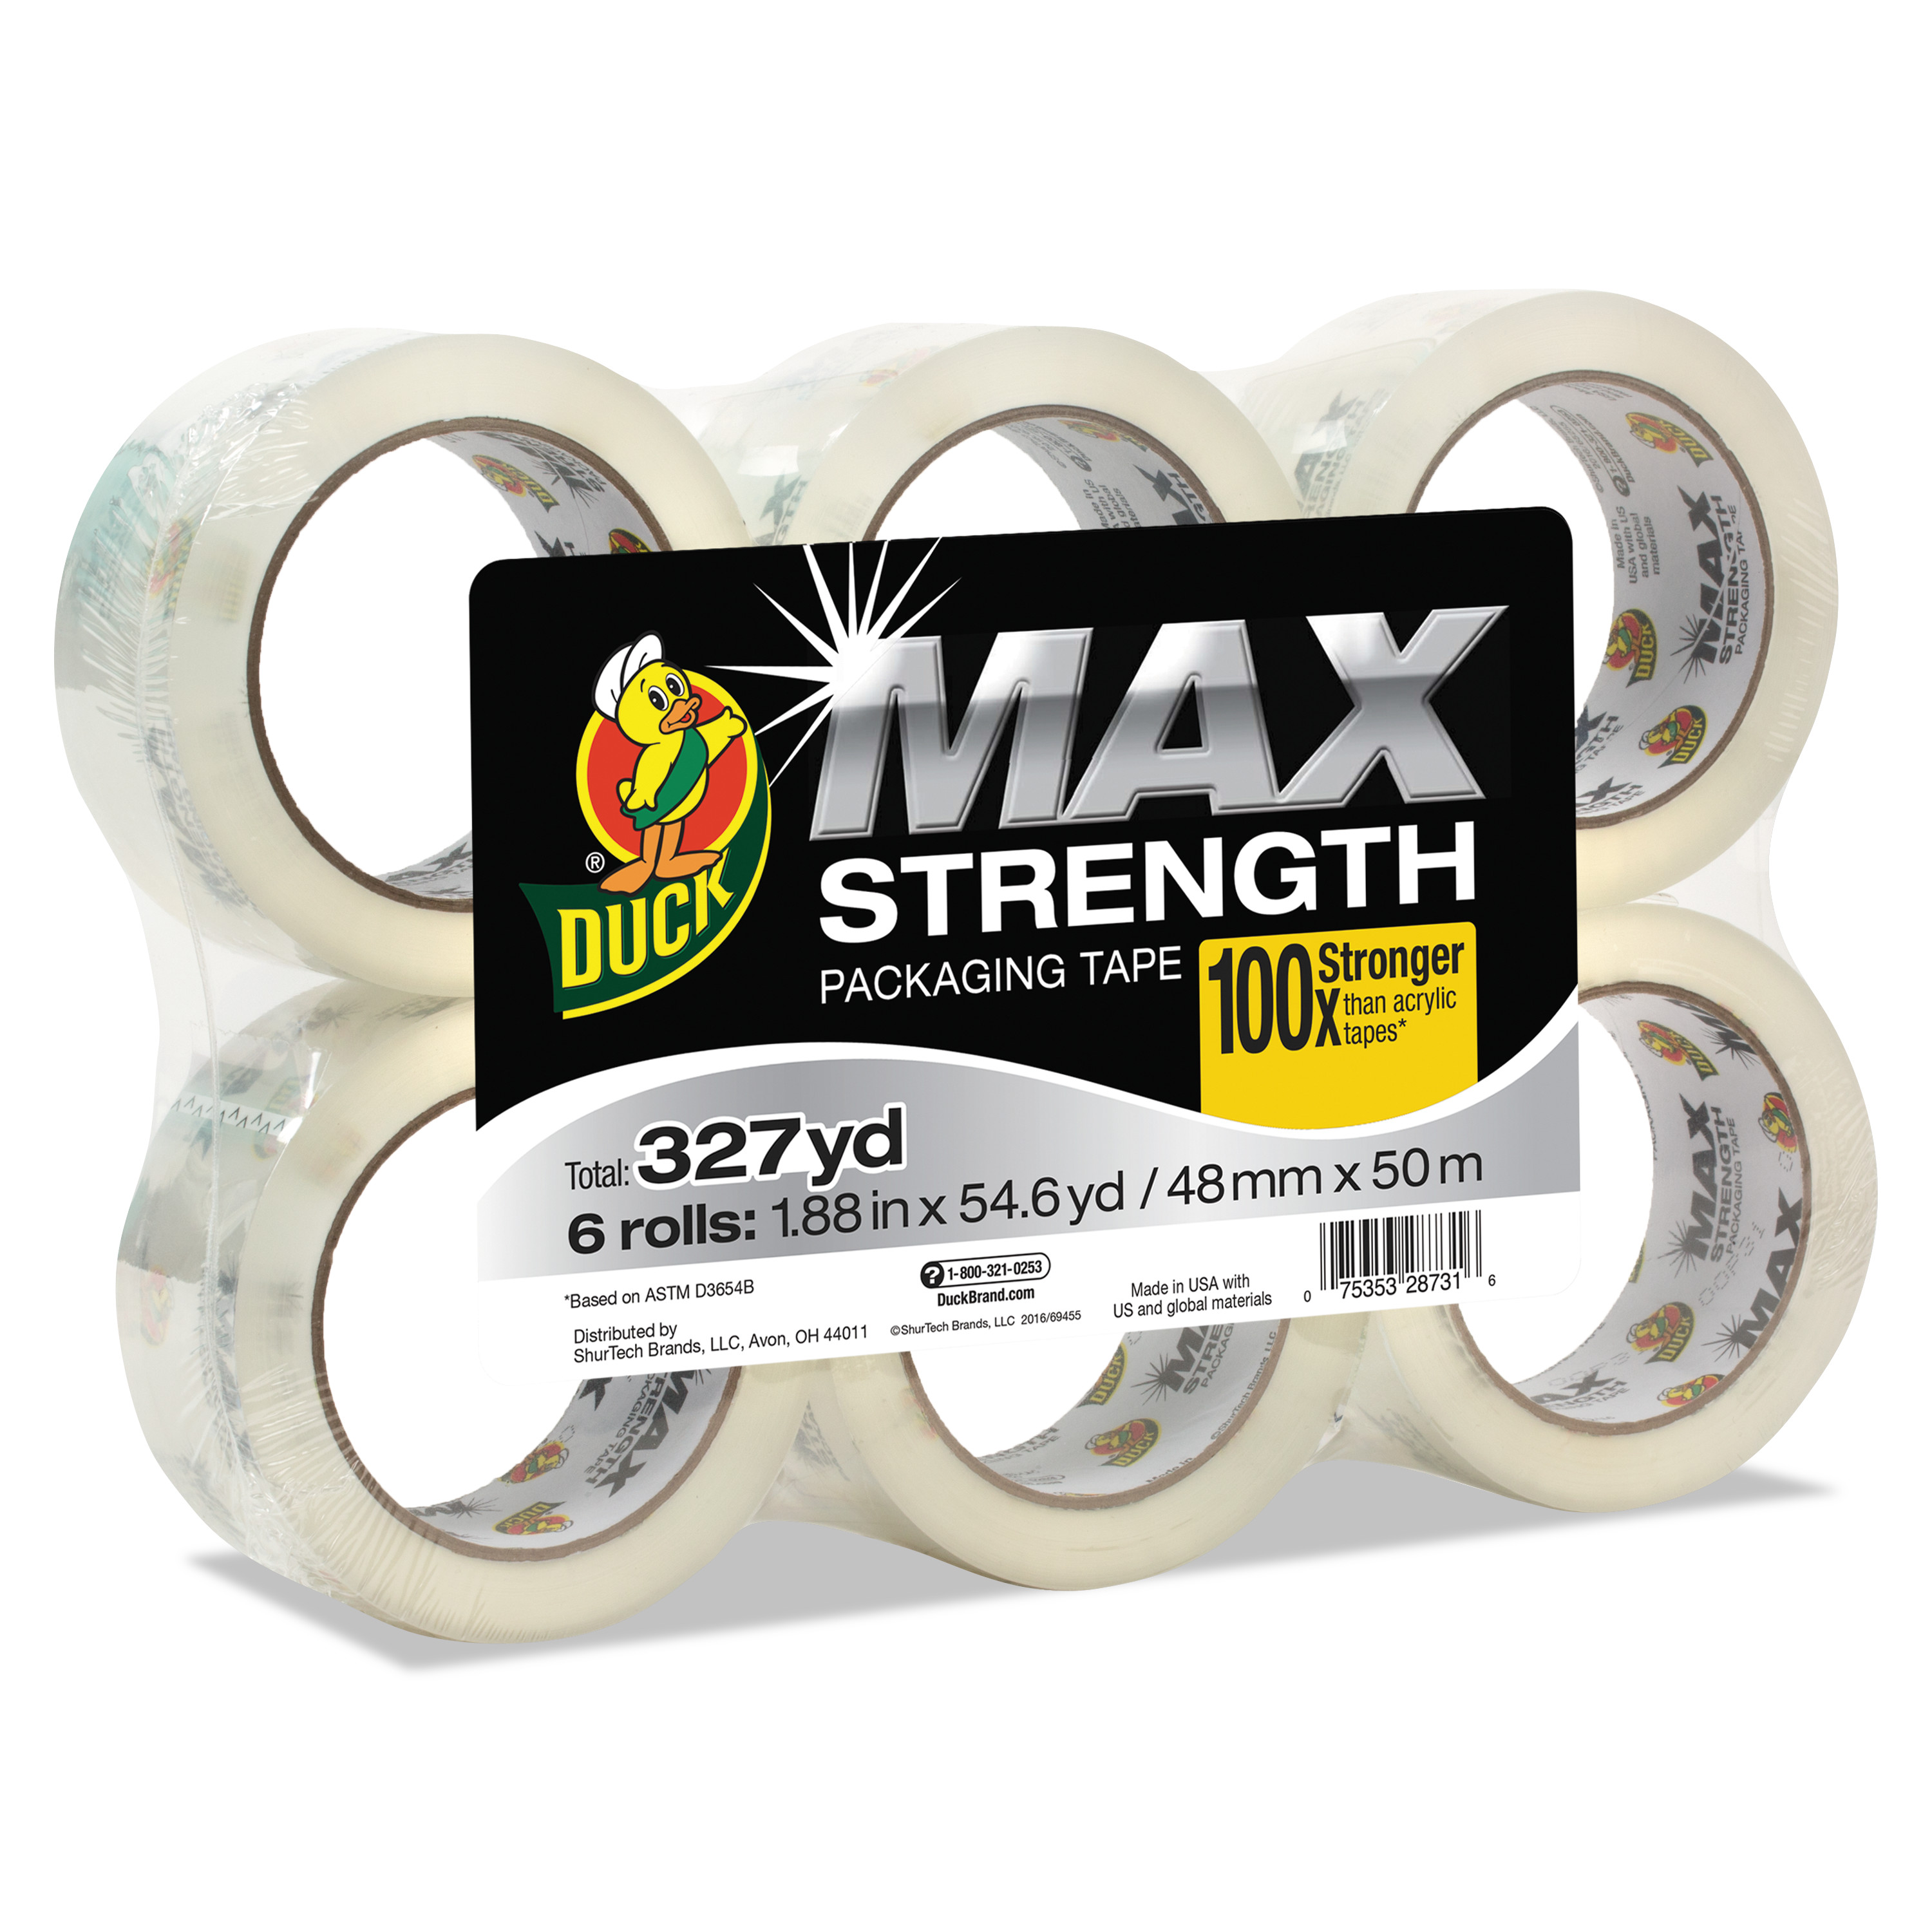  Duck 241513 MAX Packaging Tape, 3 Core, 1.88 x 54.6 yds, Crystal Clear, 6/Pack (DUC241513) 